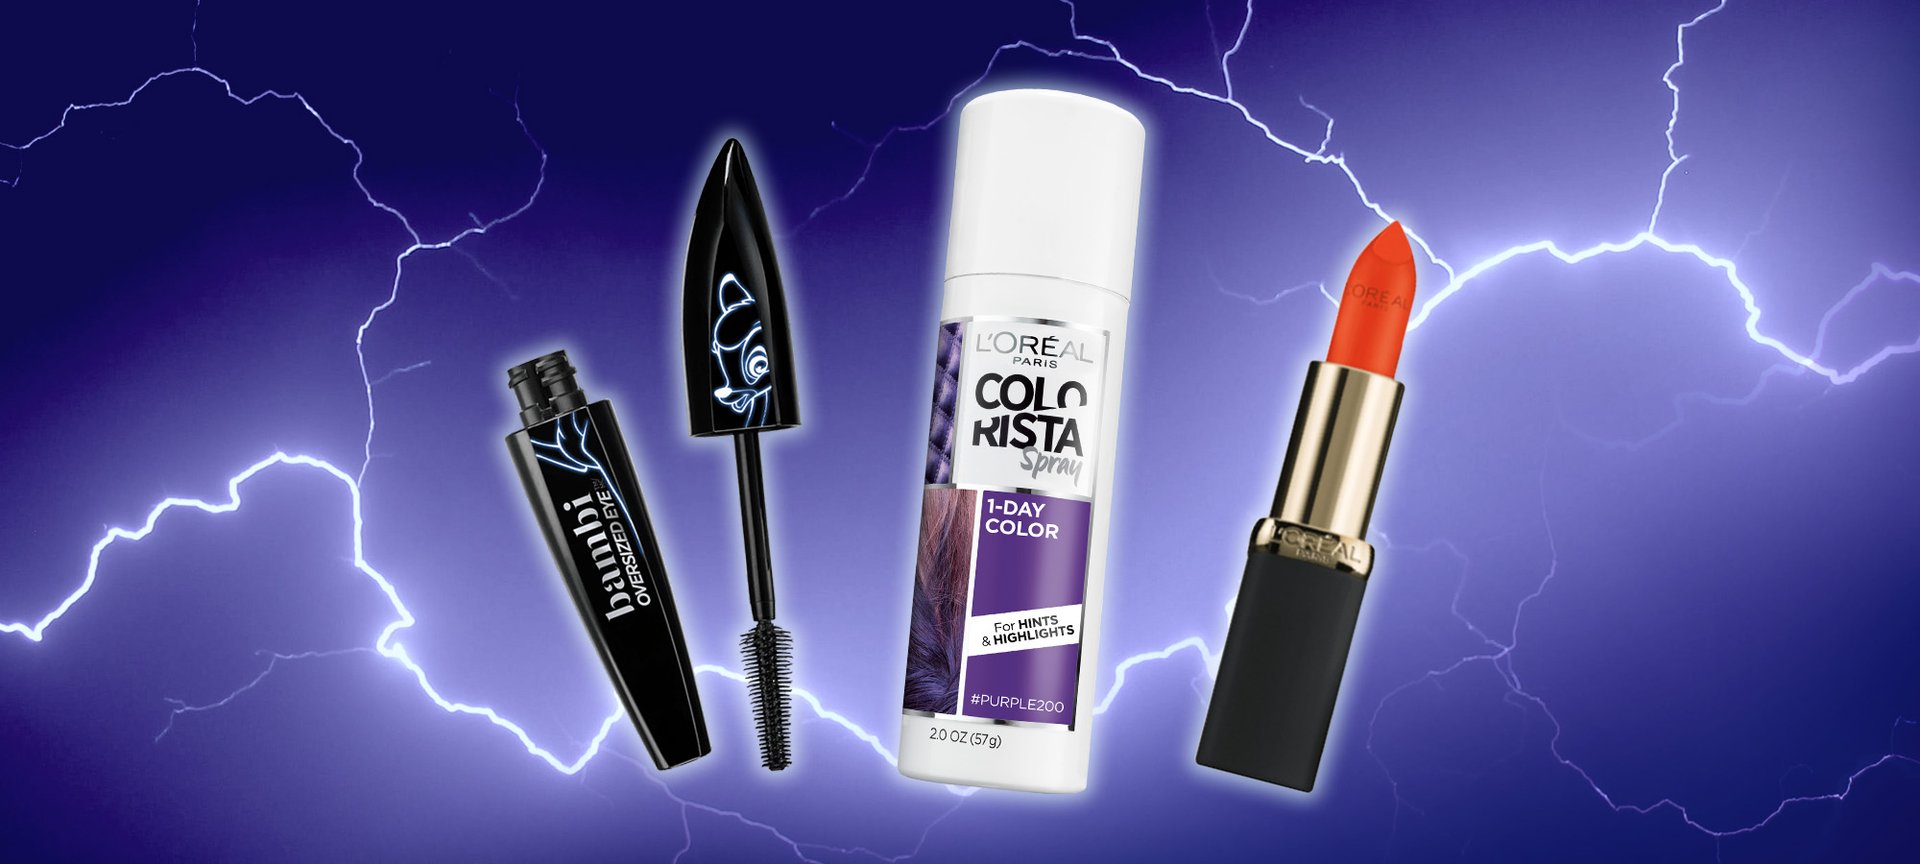 Longwear L Oreal Paris Makeup Products To Use On Halloween Thumbnail Bmag